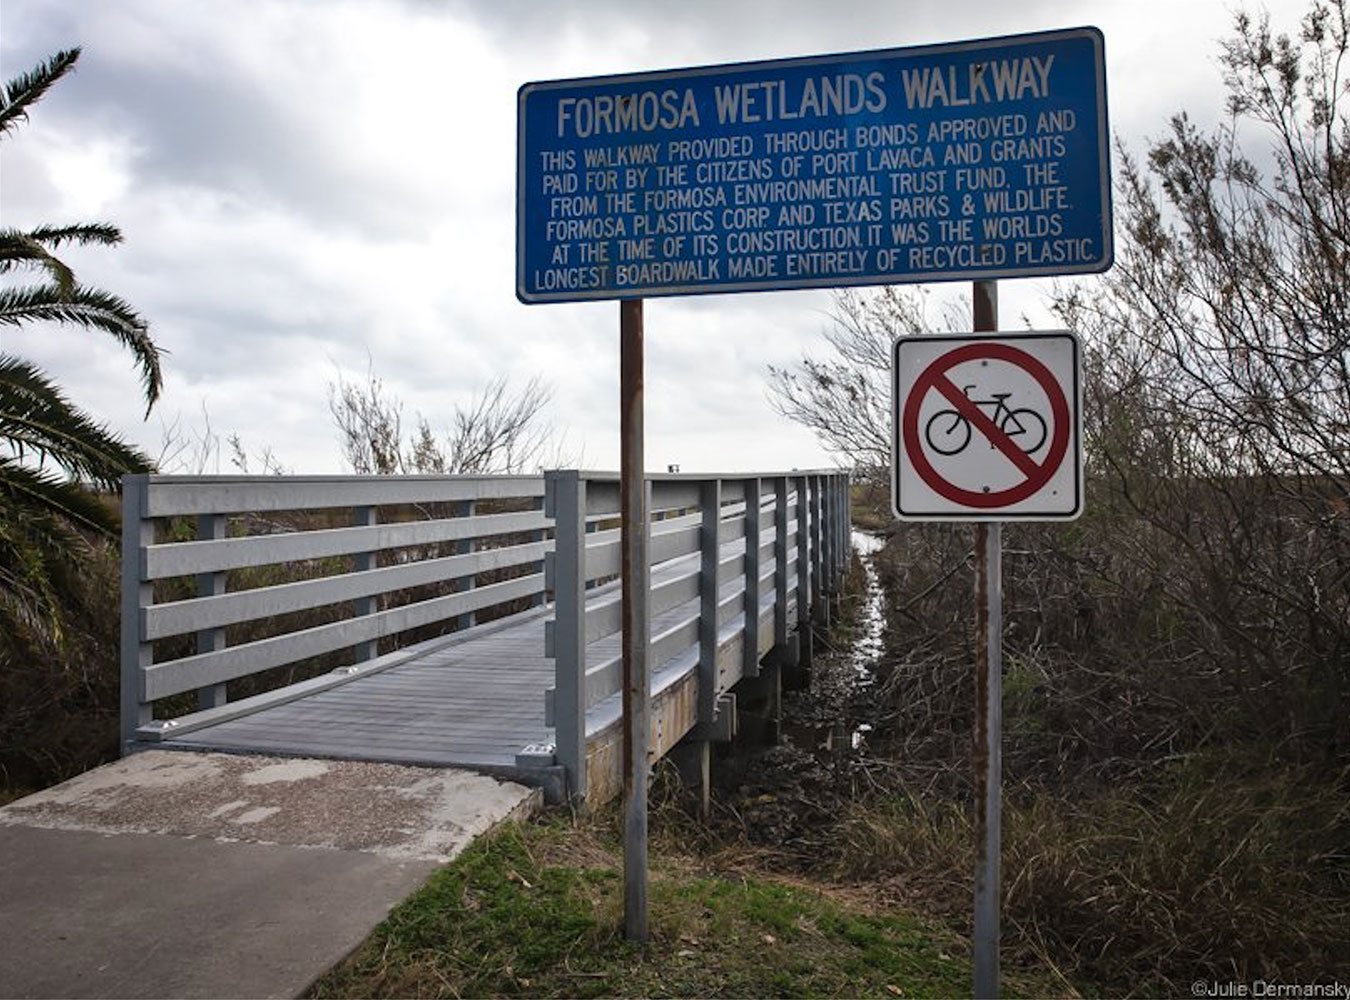 A sign noting the entrance to the Formosa Wetlands Walkway at Port Lavaca Beach. The San Antonio Estuary Waterkeeper describes the messaging as an example of greenwashing.